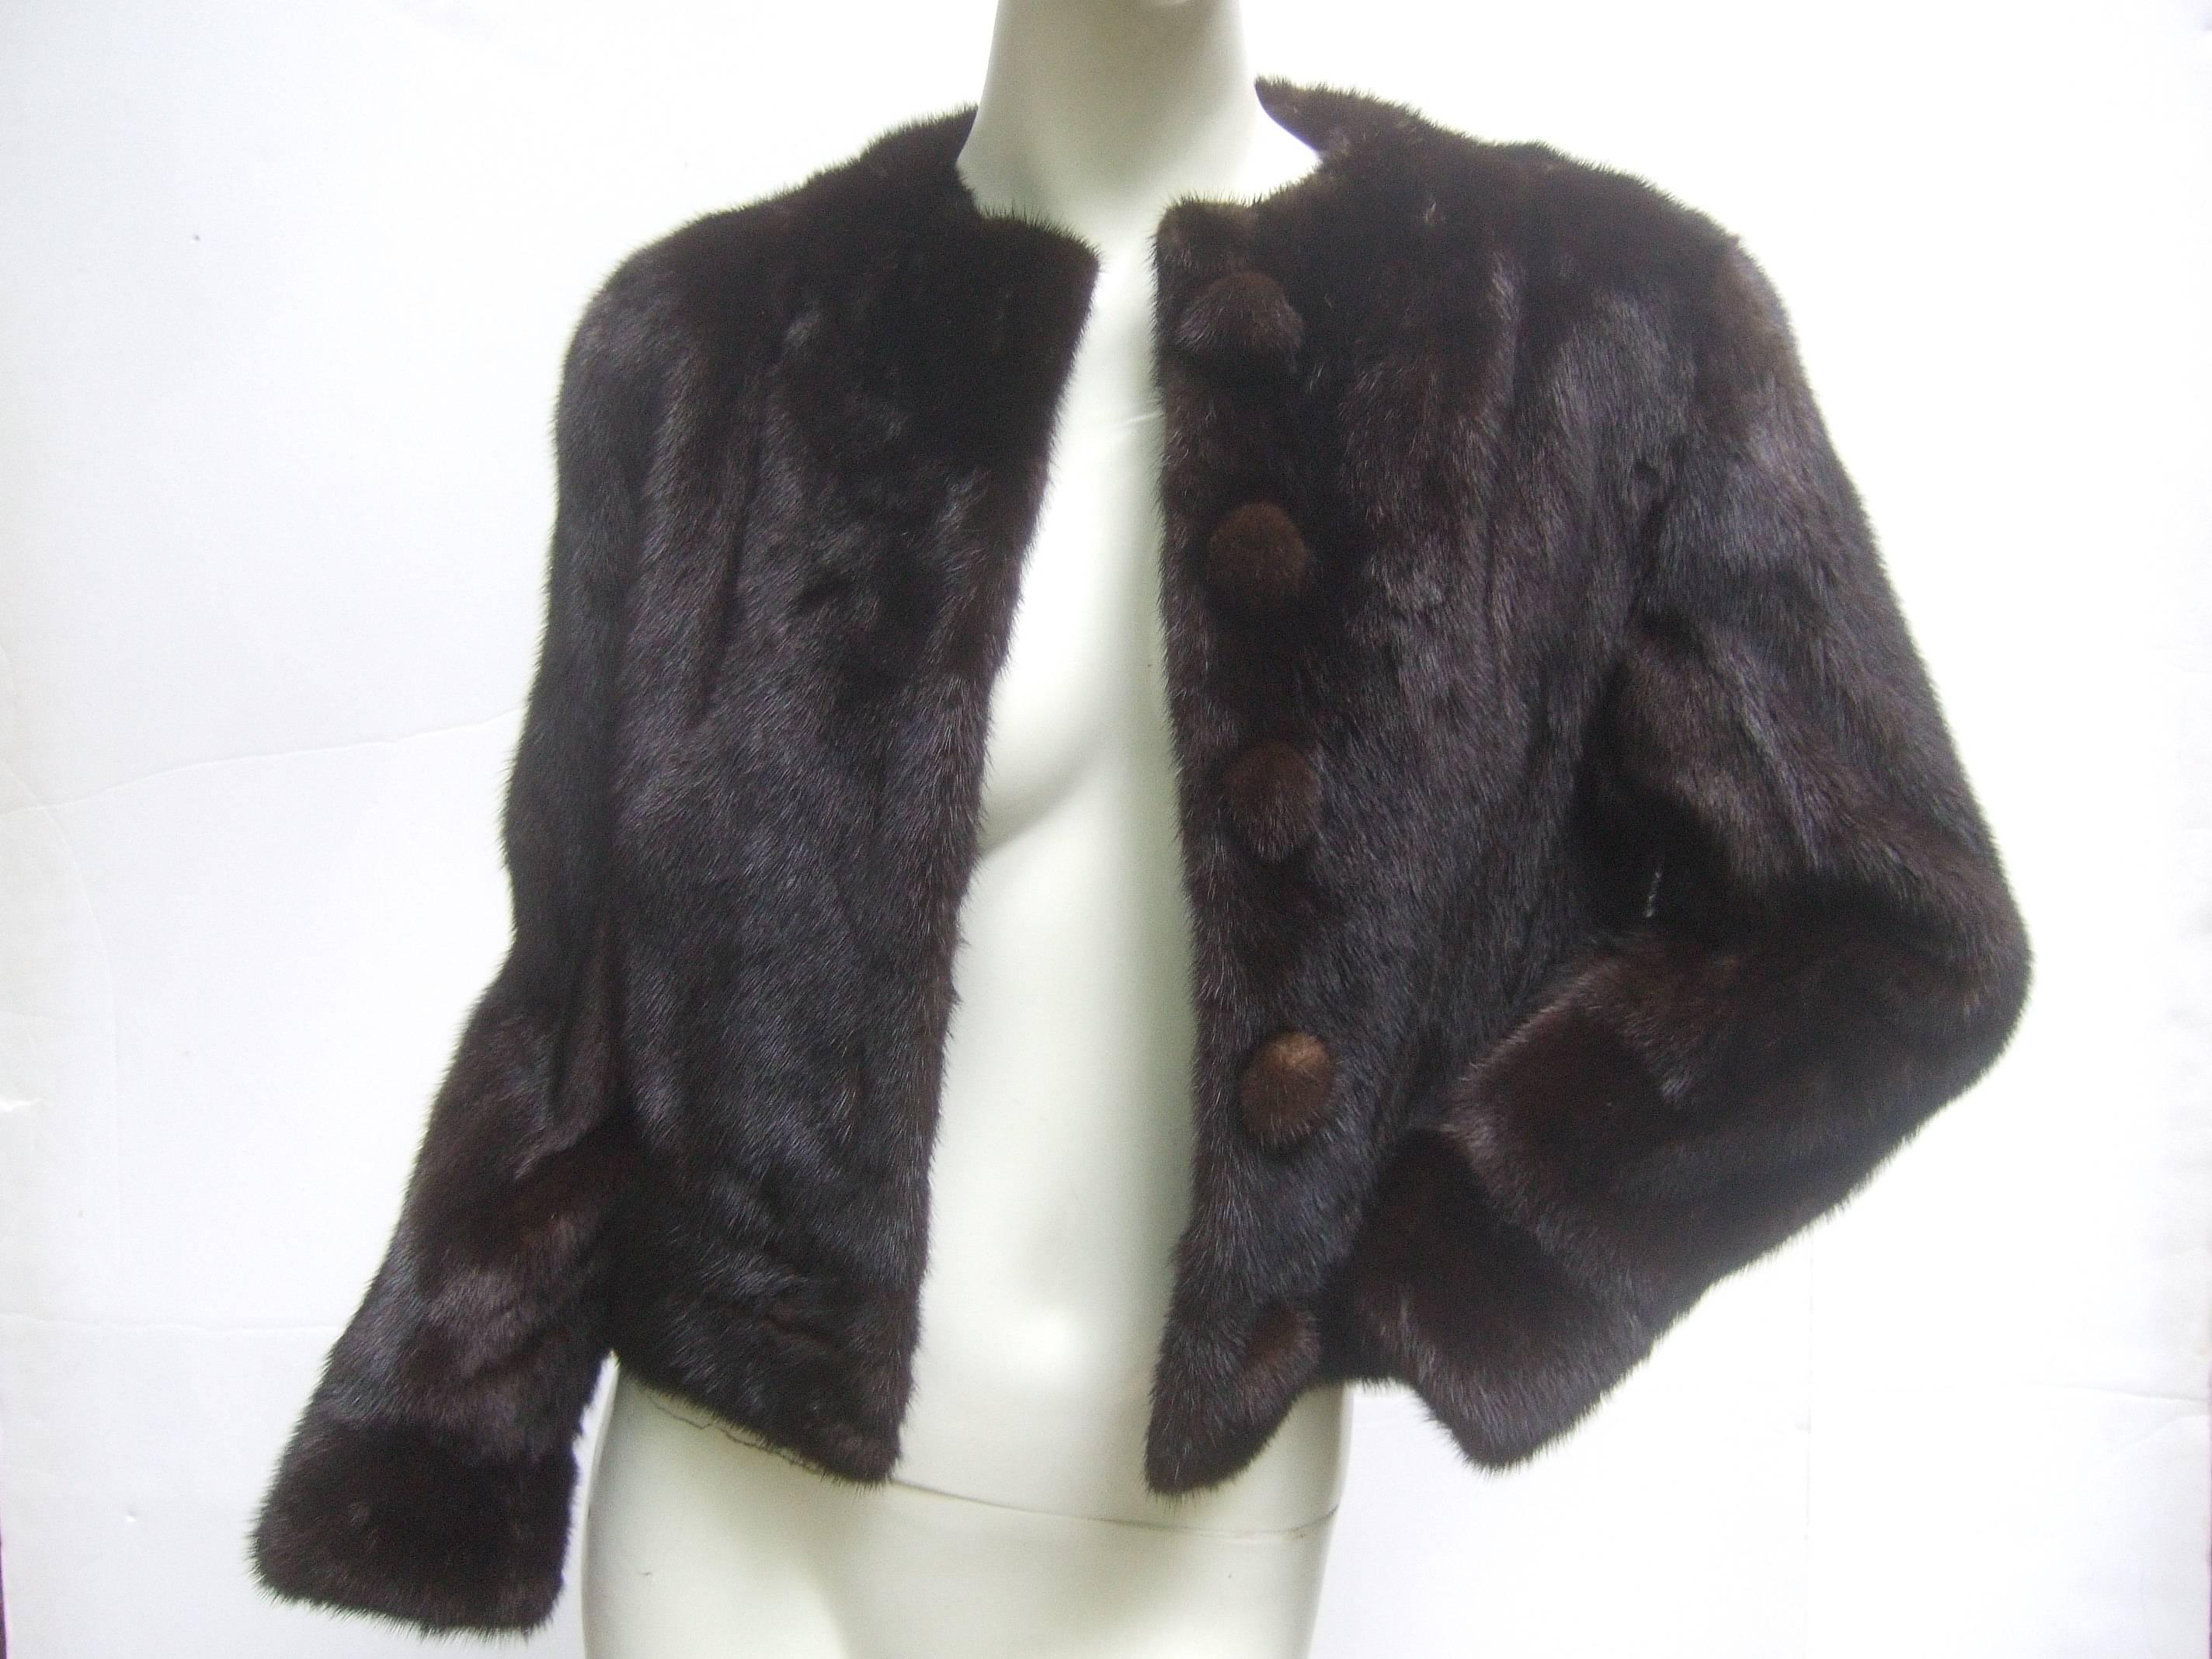 Luxurious mink fur cropped jacket c 1970
The dark brown mahogany jacket is designed
with plush lustrous mink fur

The jacket secures with five large mink 
covered buttons. The interior is lined 
in dark brown satin acetate 

The versatile